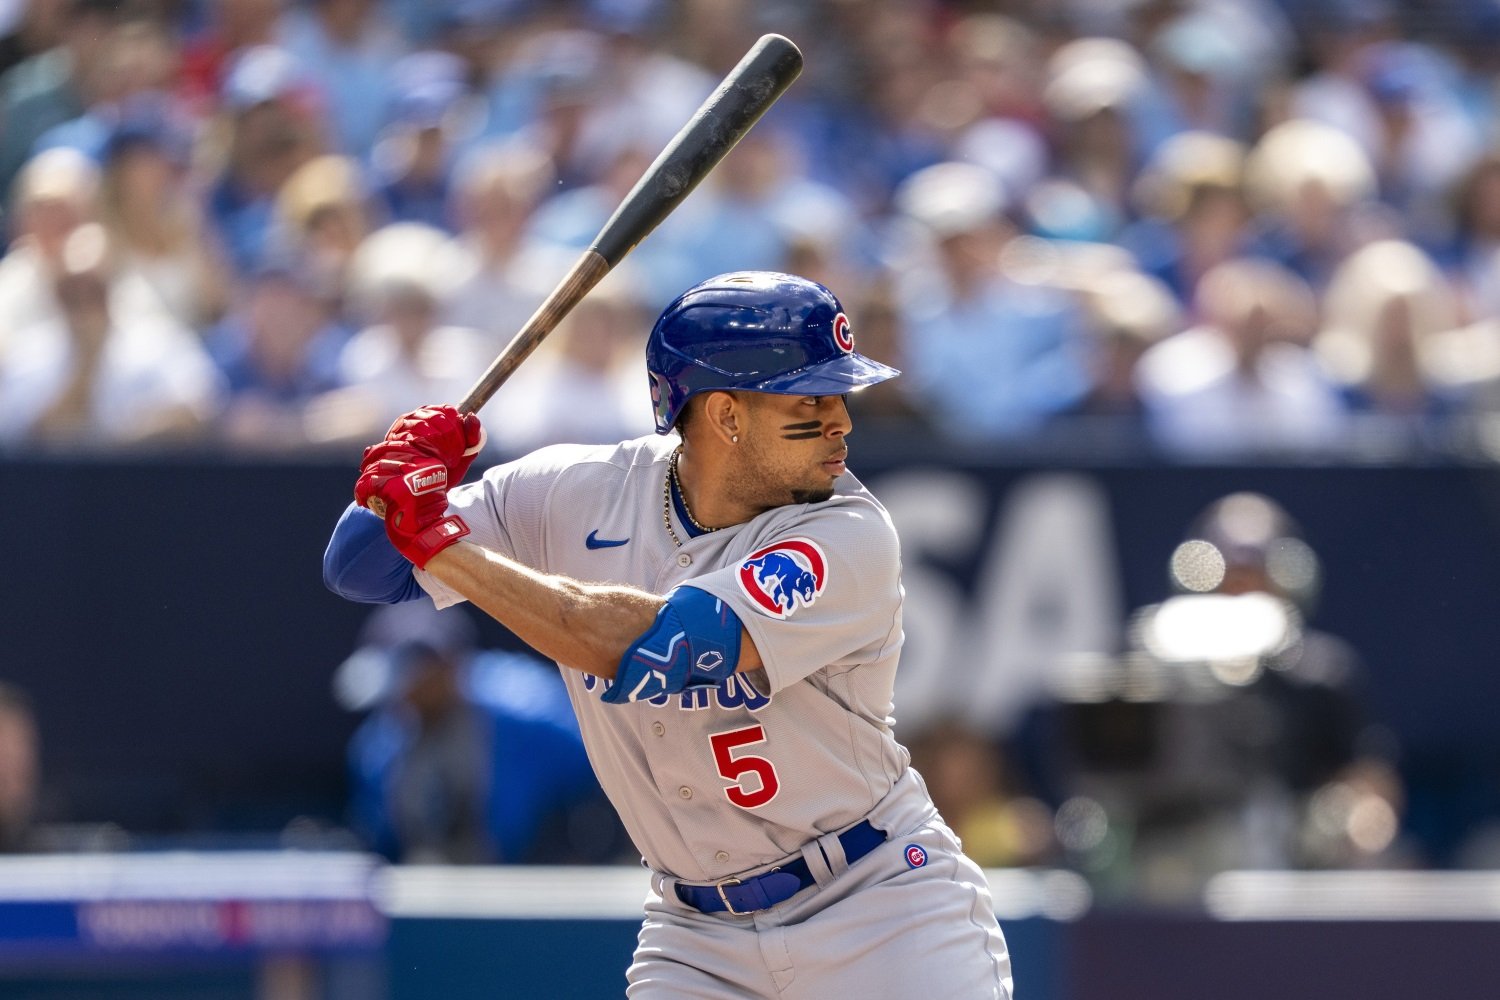 Chicago Cubs: Christopher Morel's home run a special moment